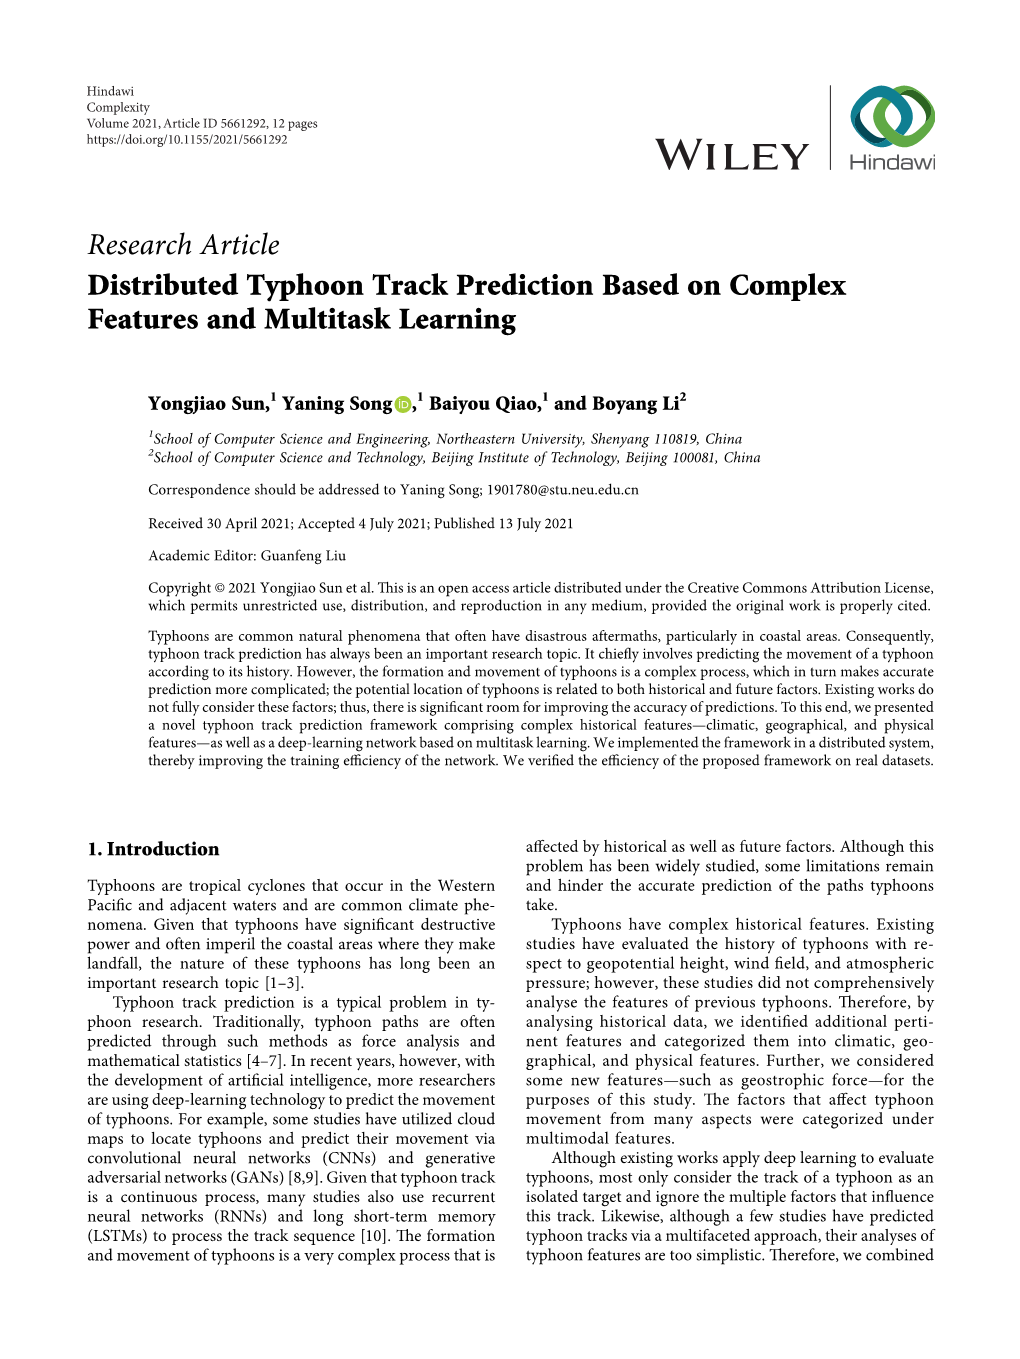 Distributed Typhoon Track Prediction Based on Complex Features and Multitask Learning